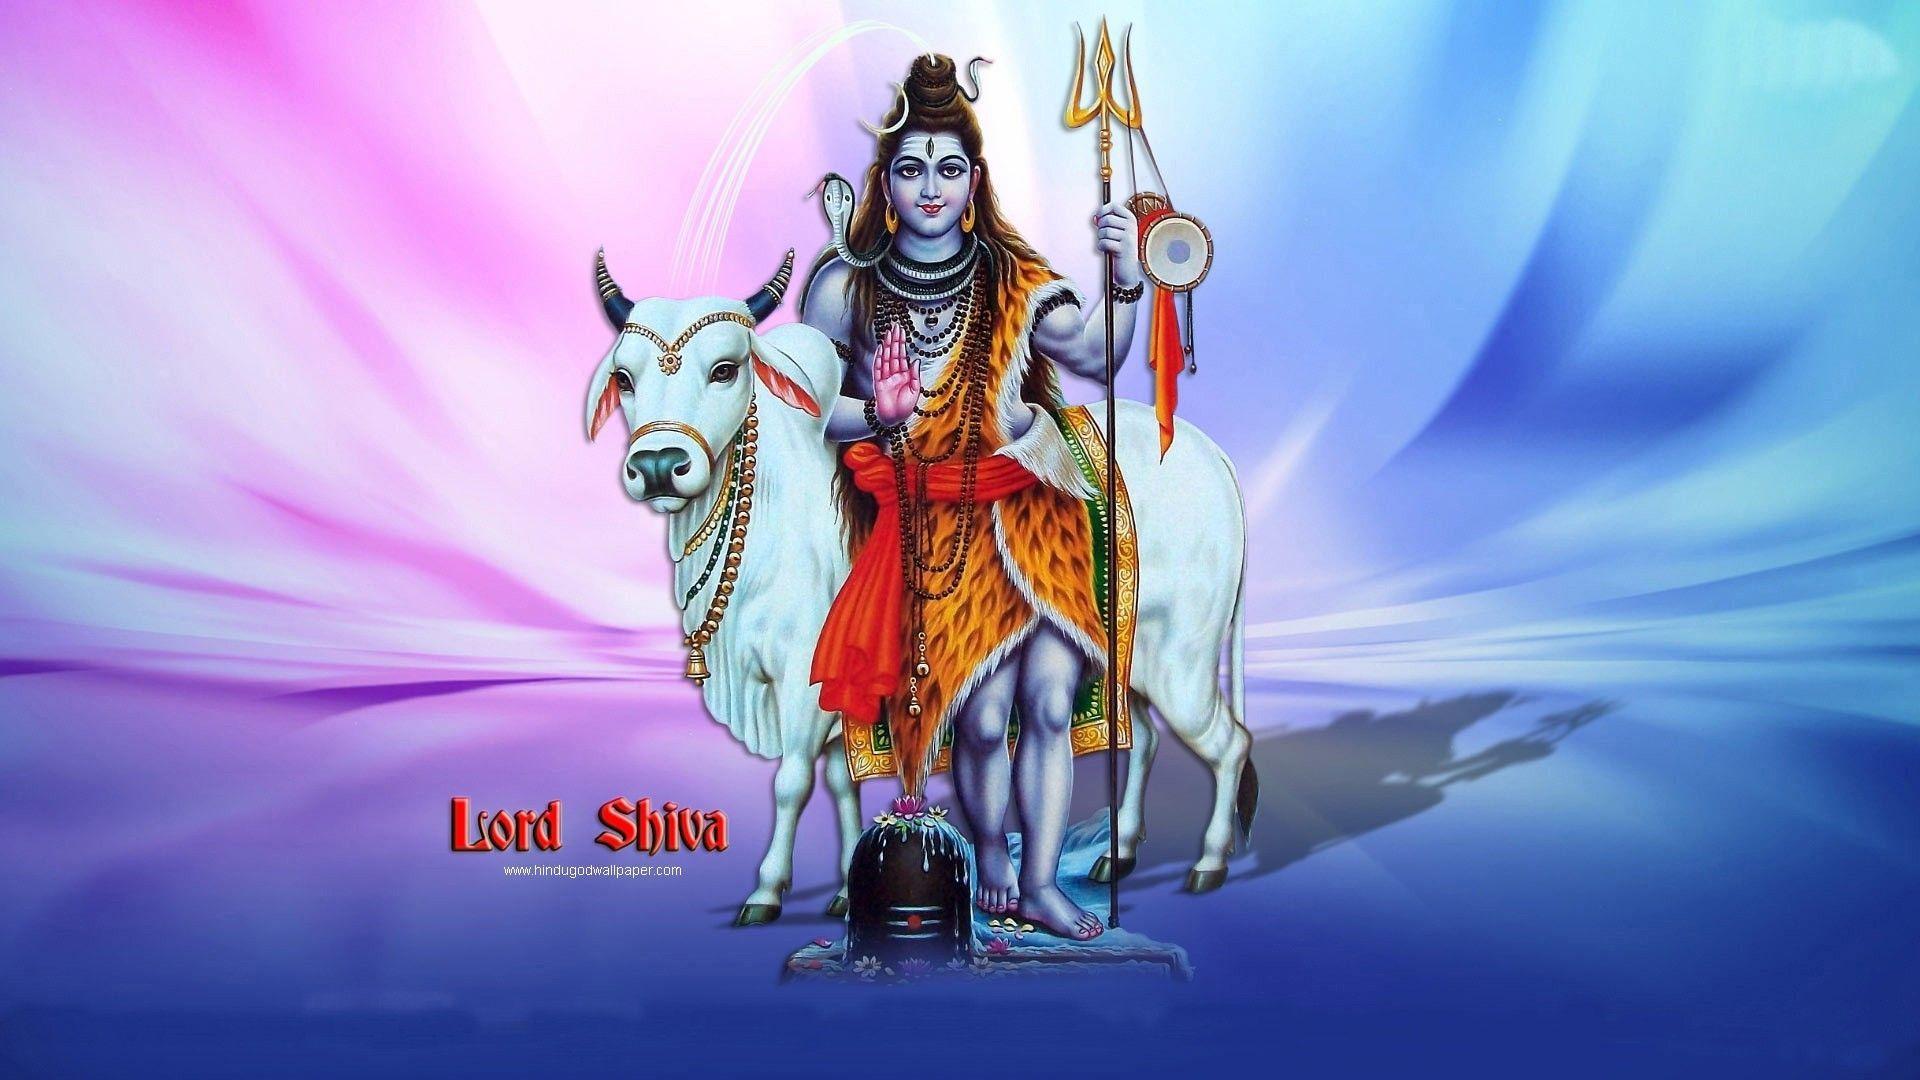 SHIVA HD WALLPAPERS, 1080P PICTURES, IMAGES HD. Hindu